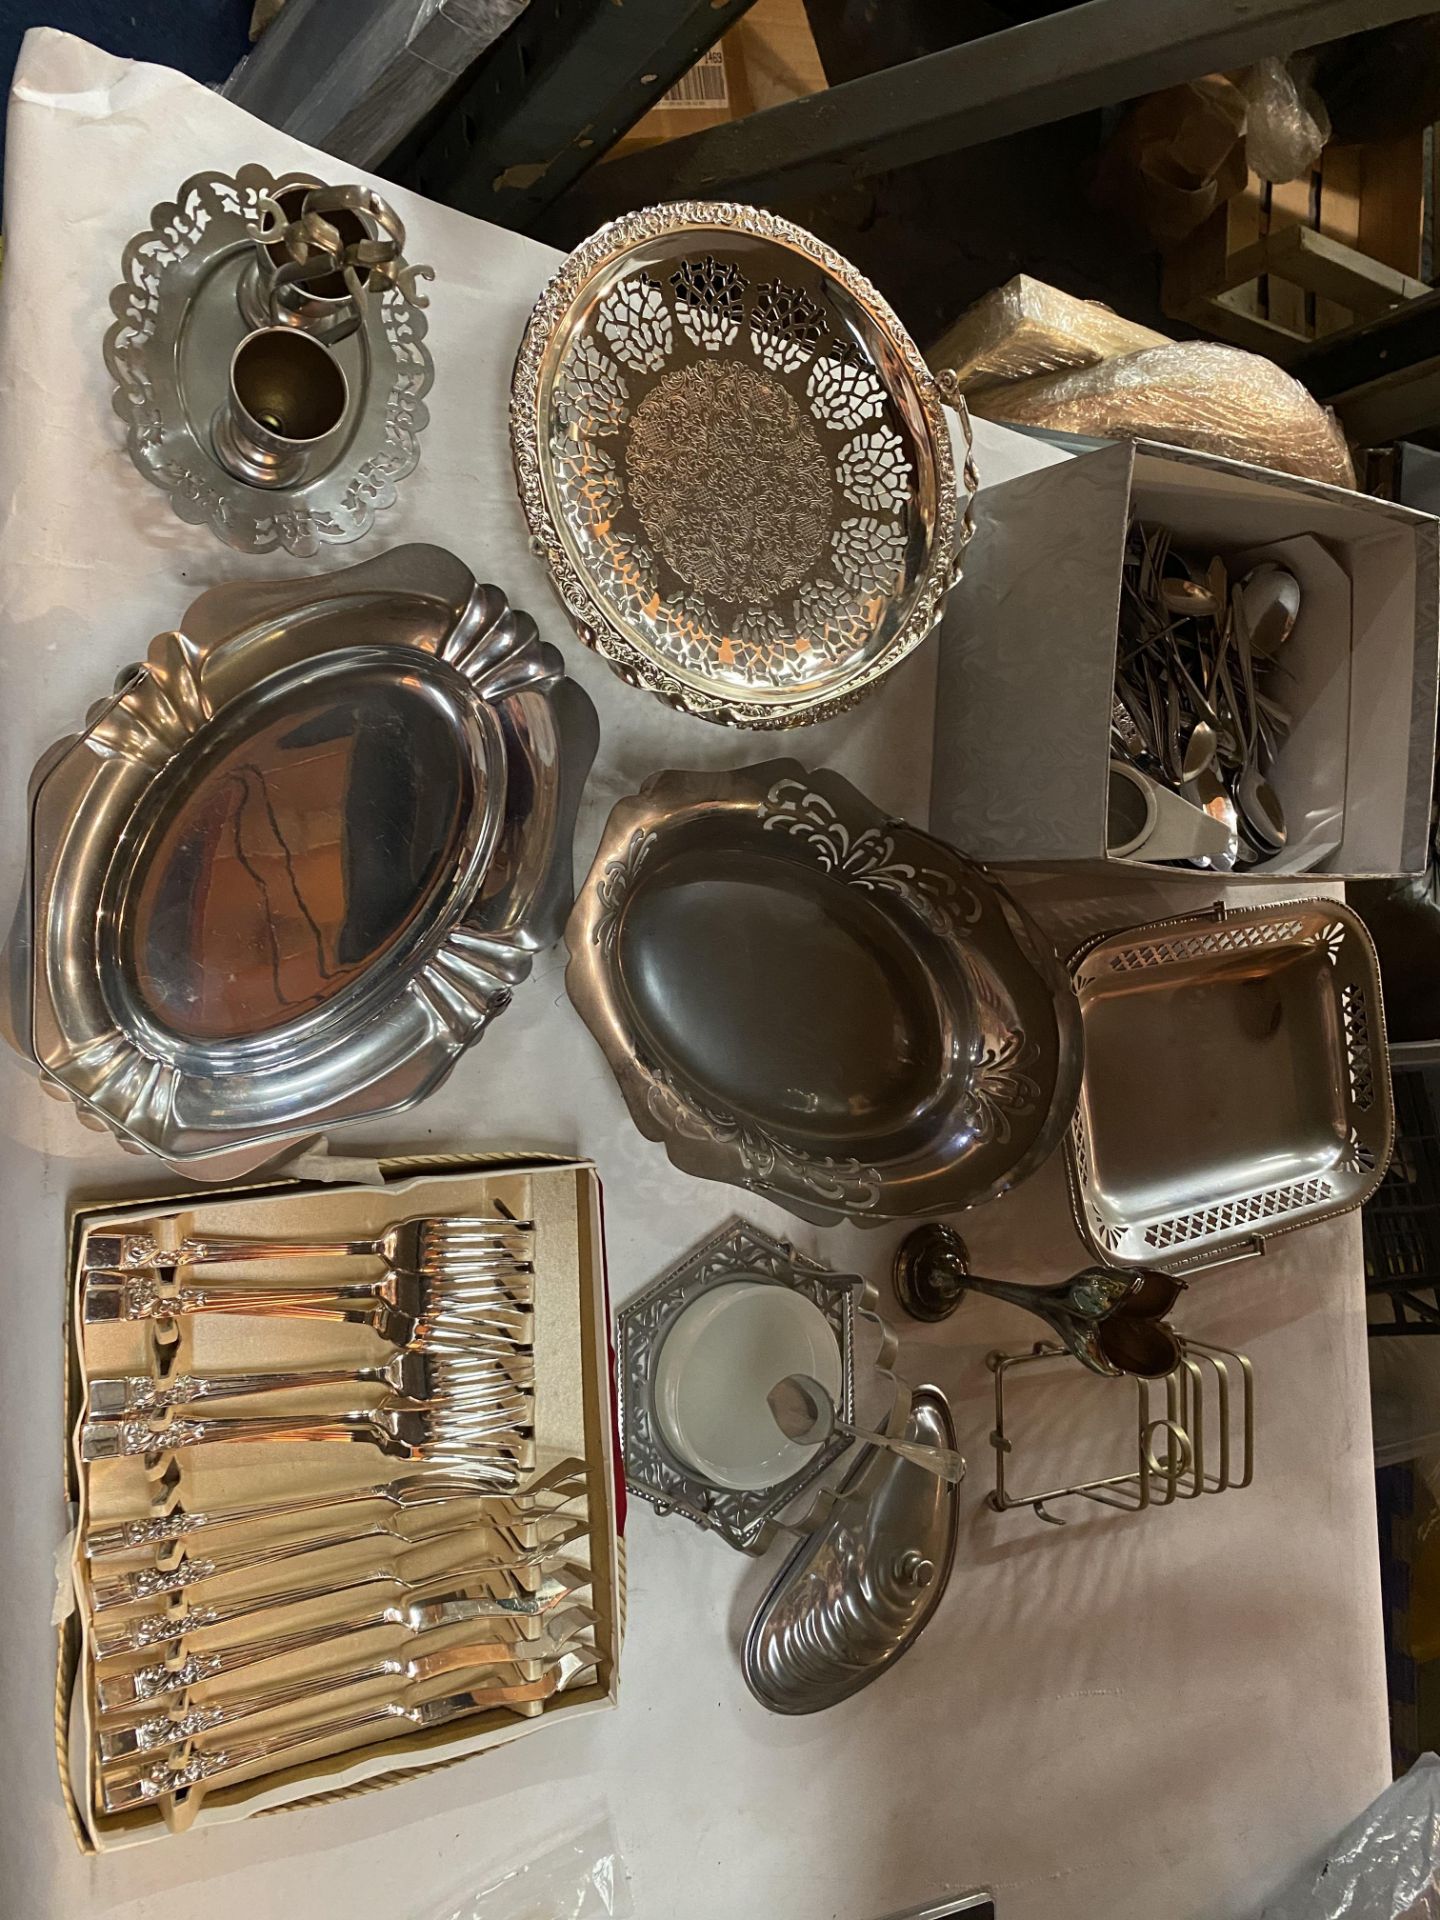 A COLLECTION OF STAINLESS STEEL DECORATIVE PLATES, EGG CUPS ON A TRAY, TOAST RACK , CUTLERY